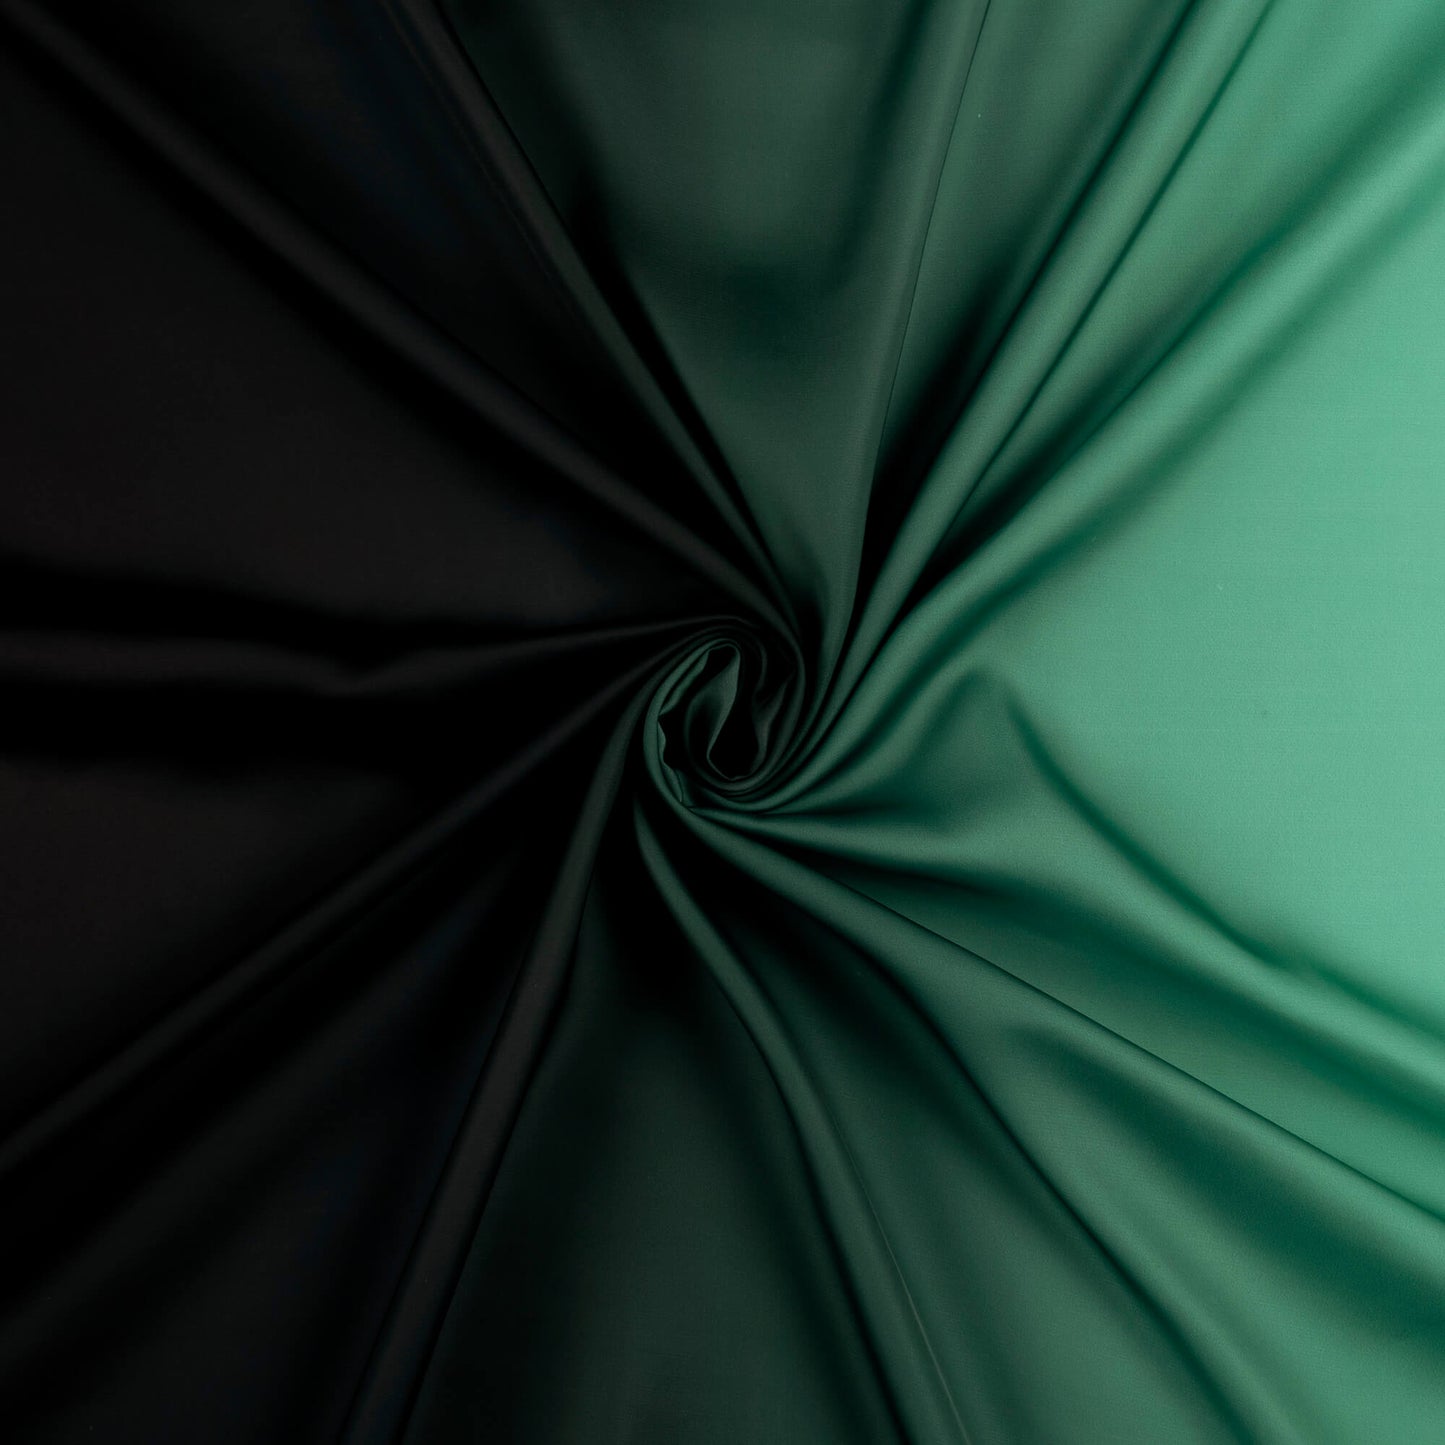 Green And Black Ombre Digital Print Imported Satin Fabric